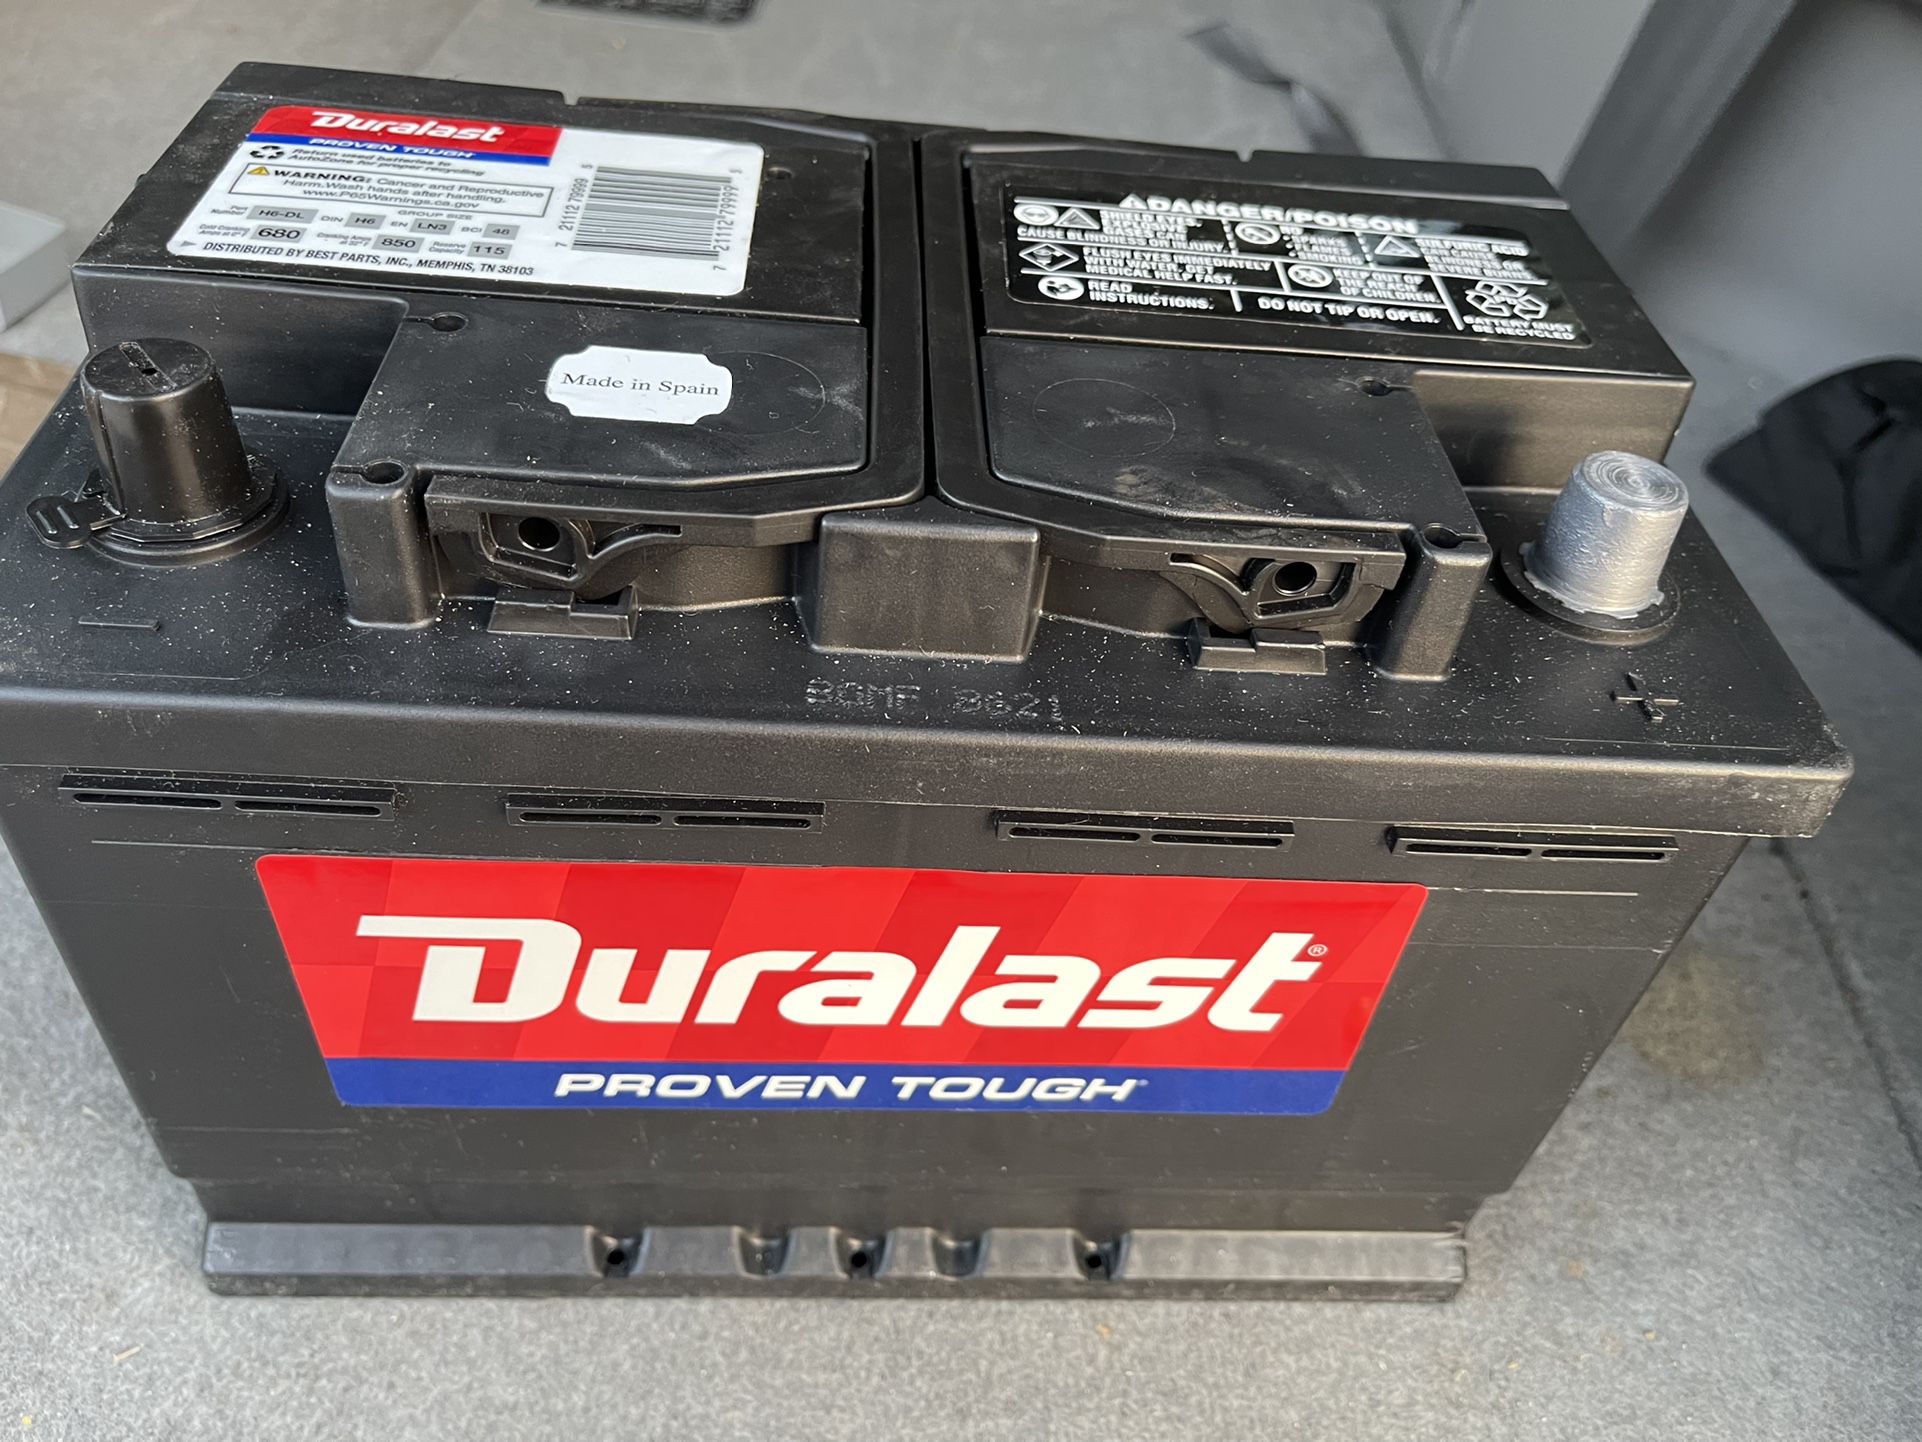 duralast Battery  For Sale  New  From Auto Zone 2022